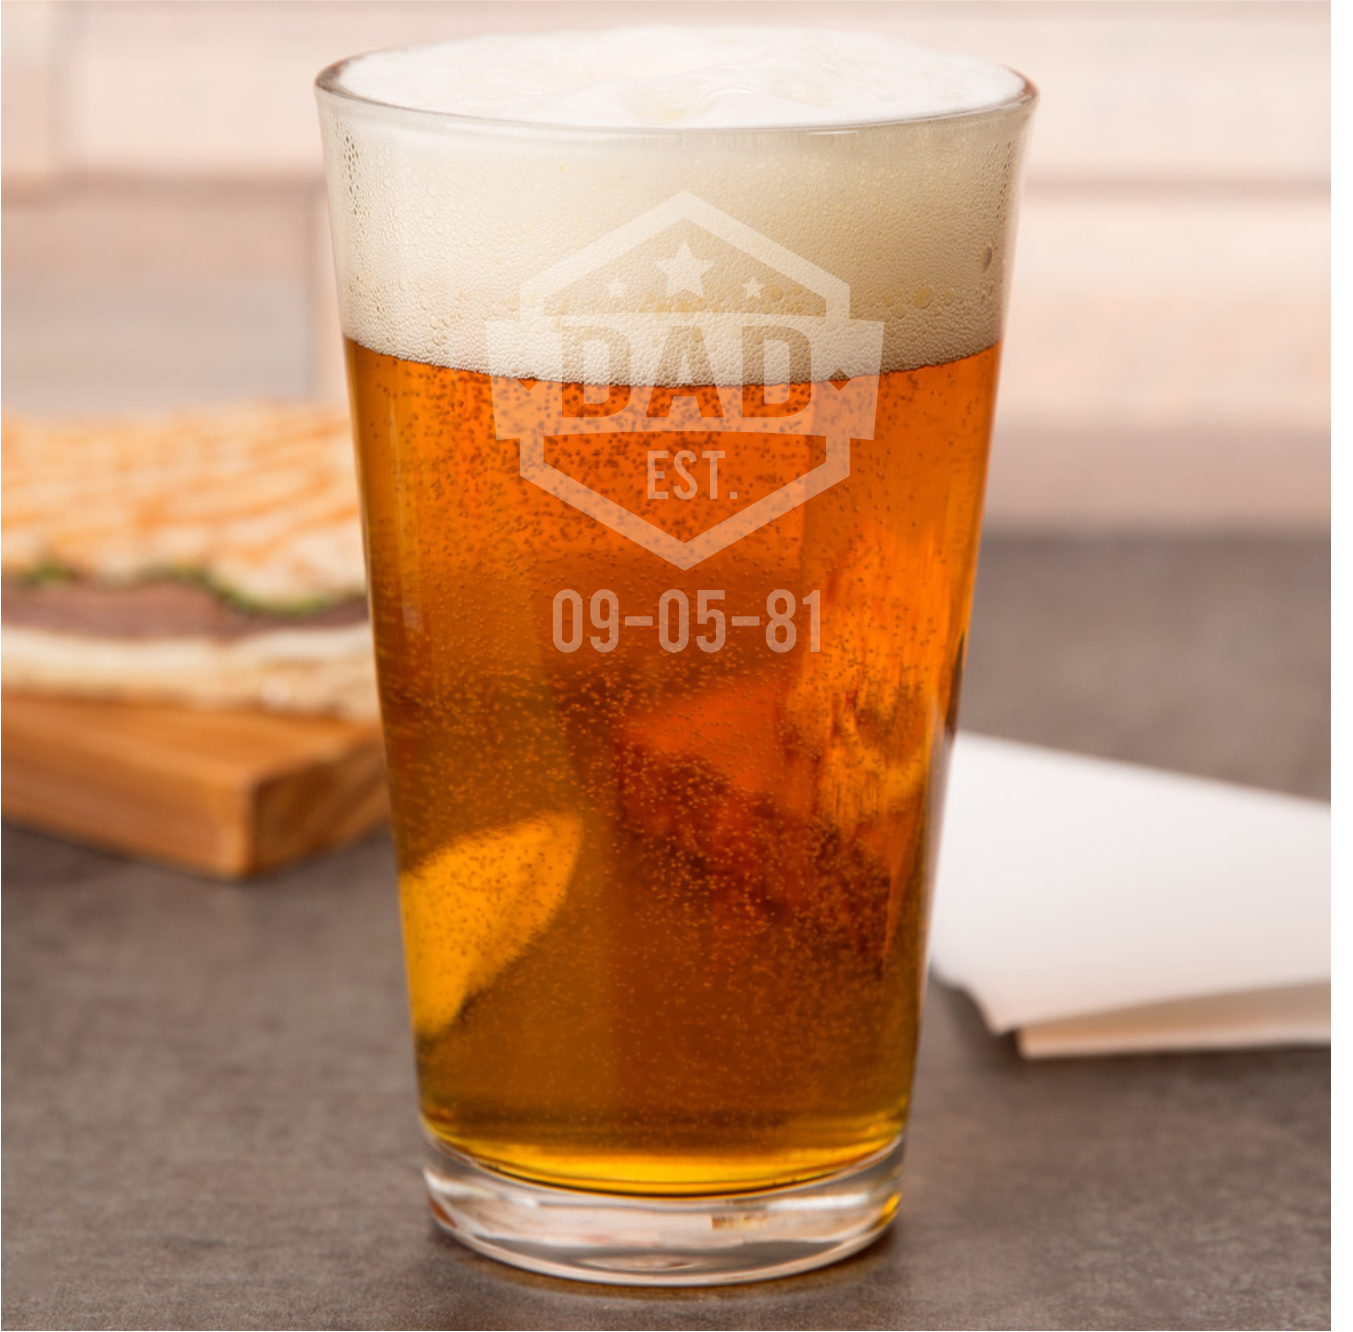 SET Dad Established Custom Pint Beer Glasses Tumblers Drinkware 16 oz. Cocktail Mixing Glass Gifts